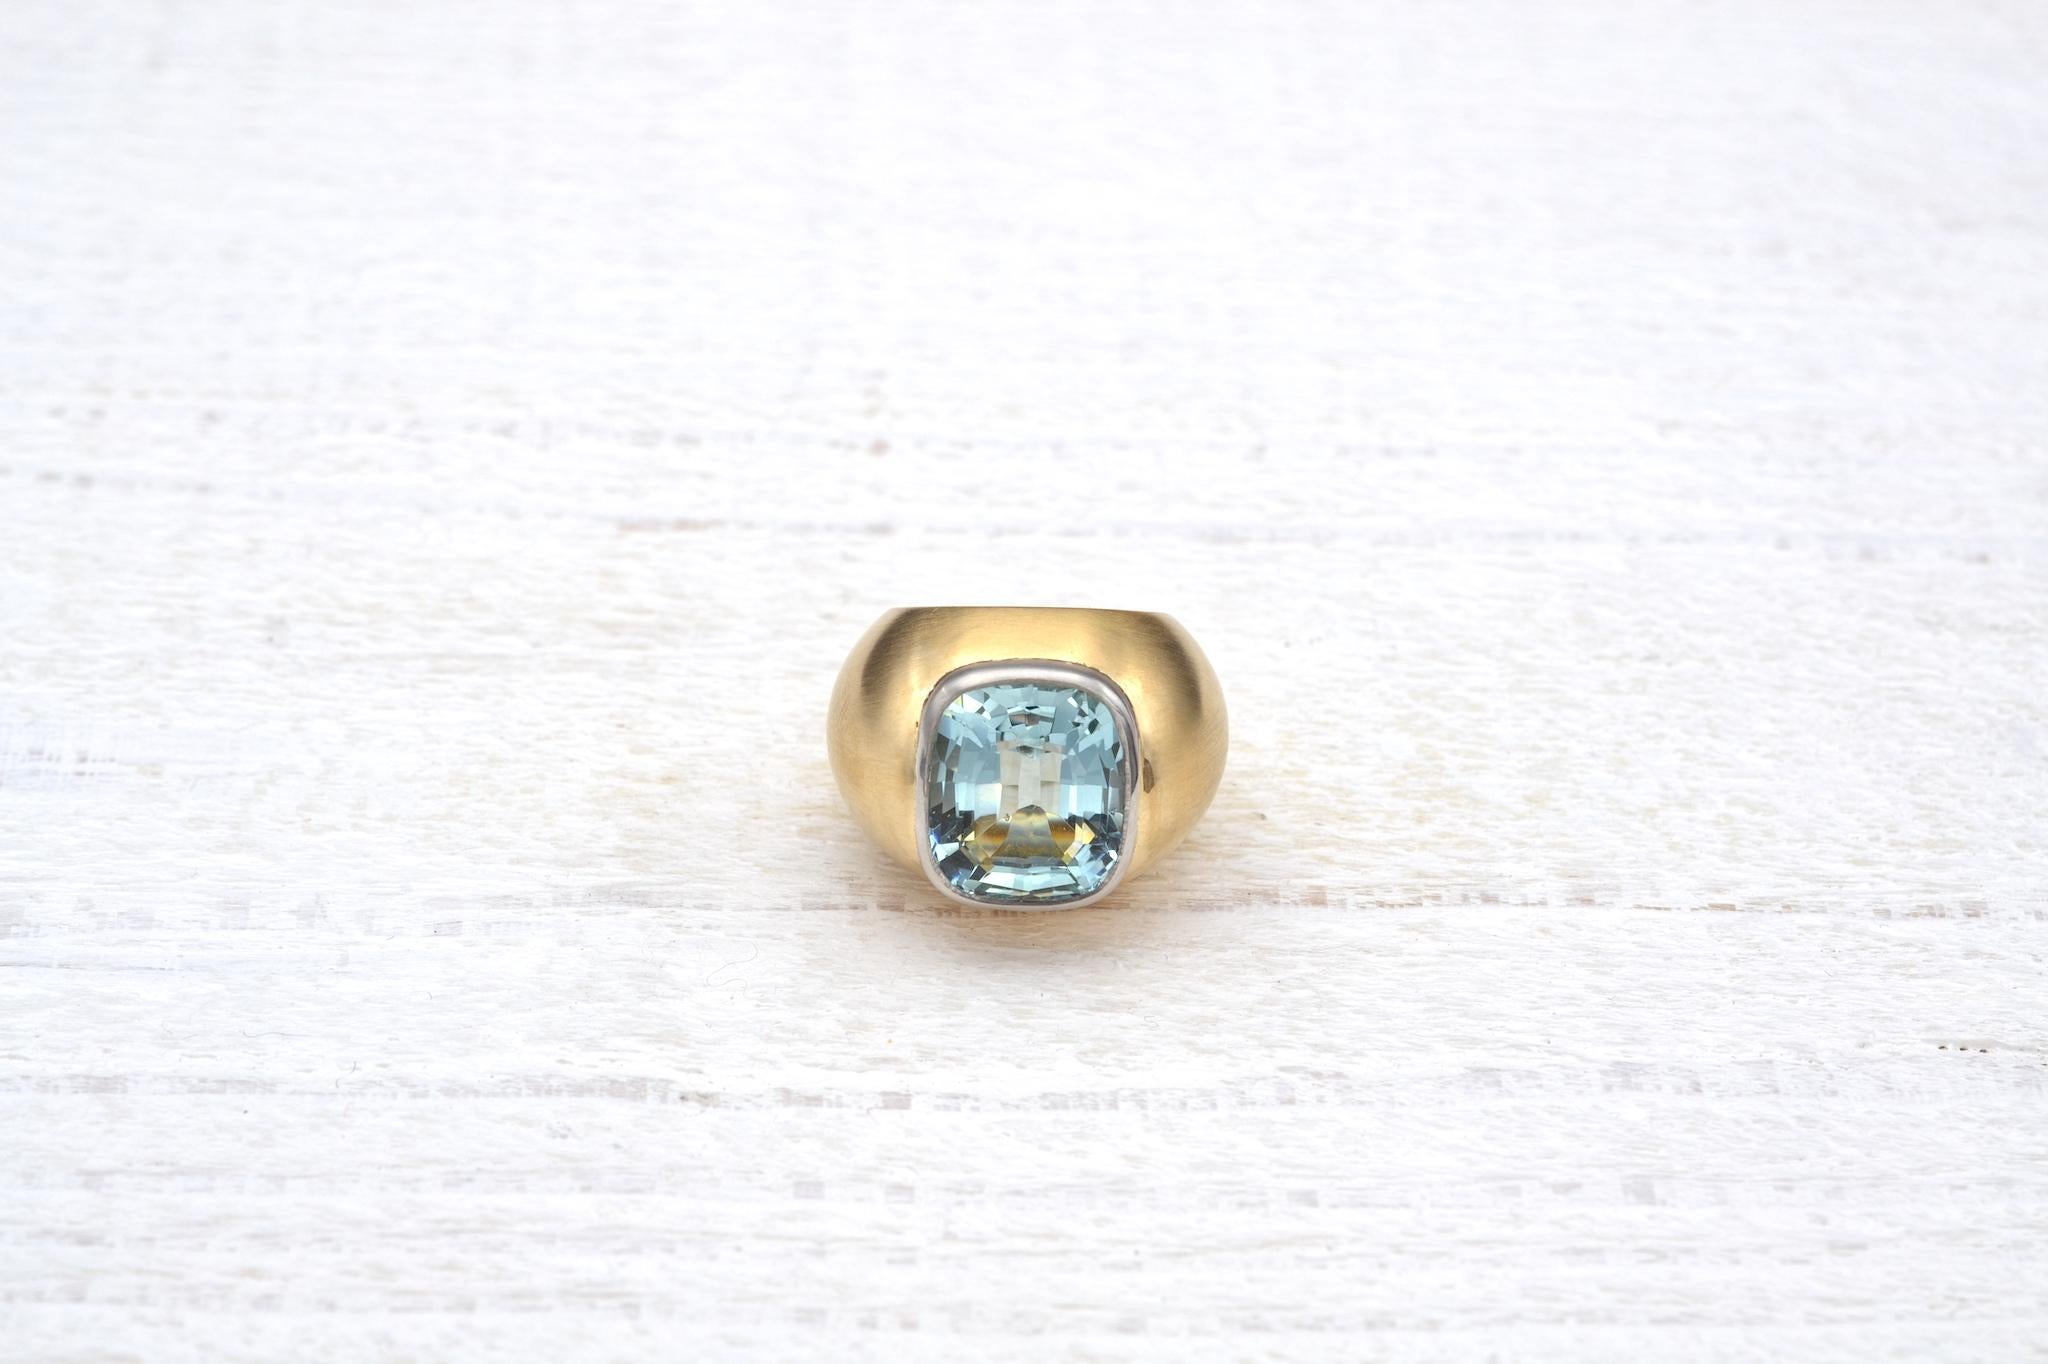 Stones: Natural aquamarine of 12.63 carats
Material: Brushed 18k yellow gold and platinum
Dimensions: 18 mm length on finger, 10 mm height
Weight: 30g
Size: 53 (free sizing)
Certificate
Ref. : 23764 / 23770